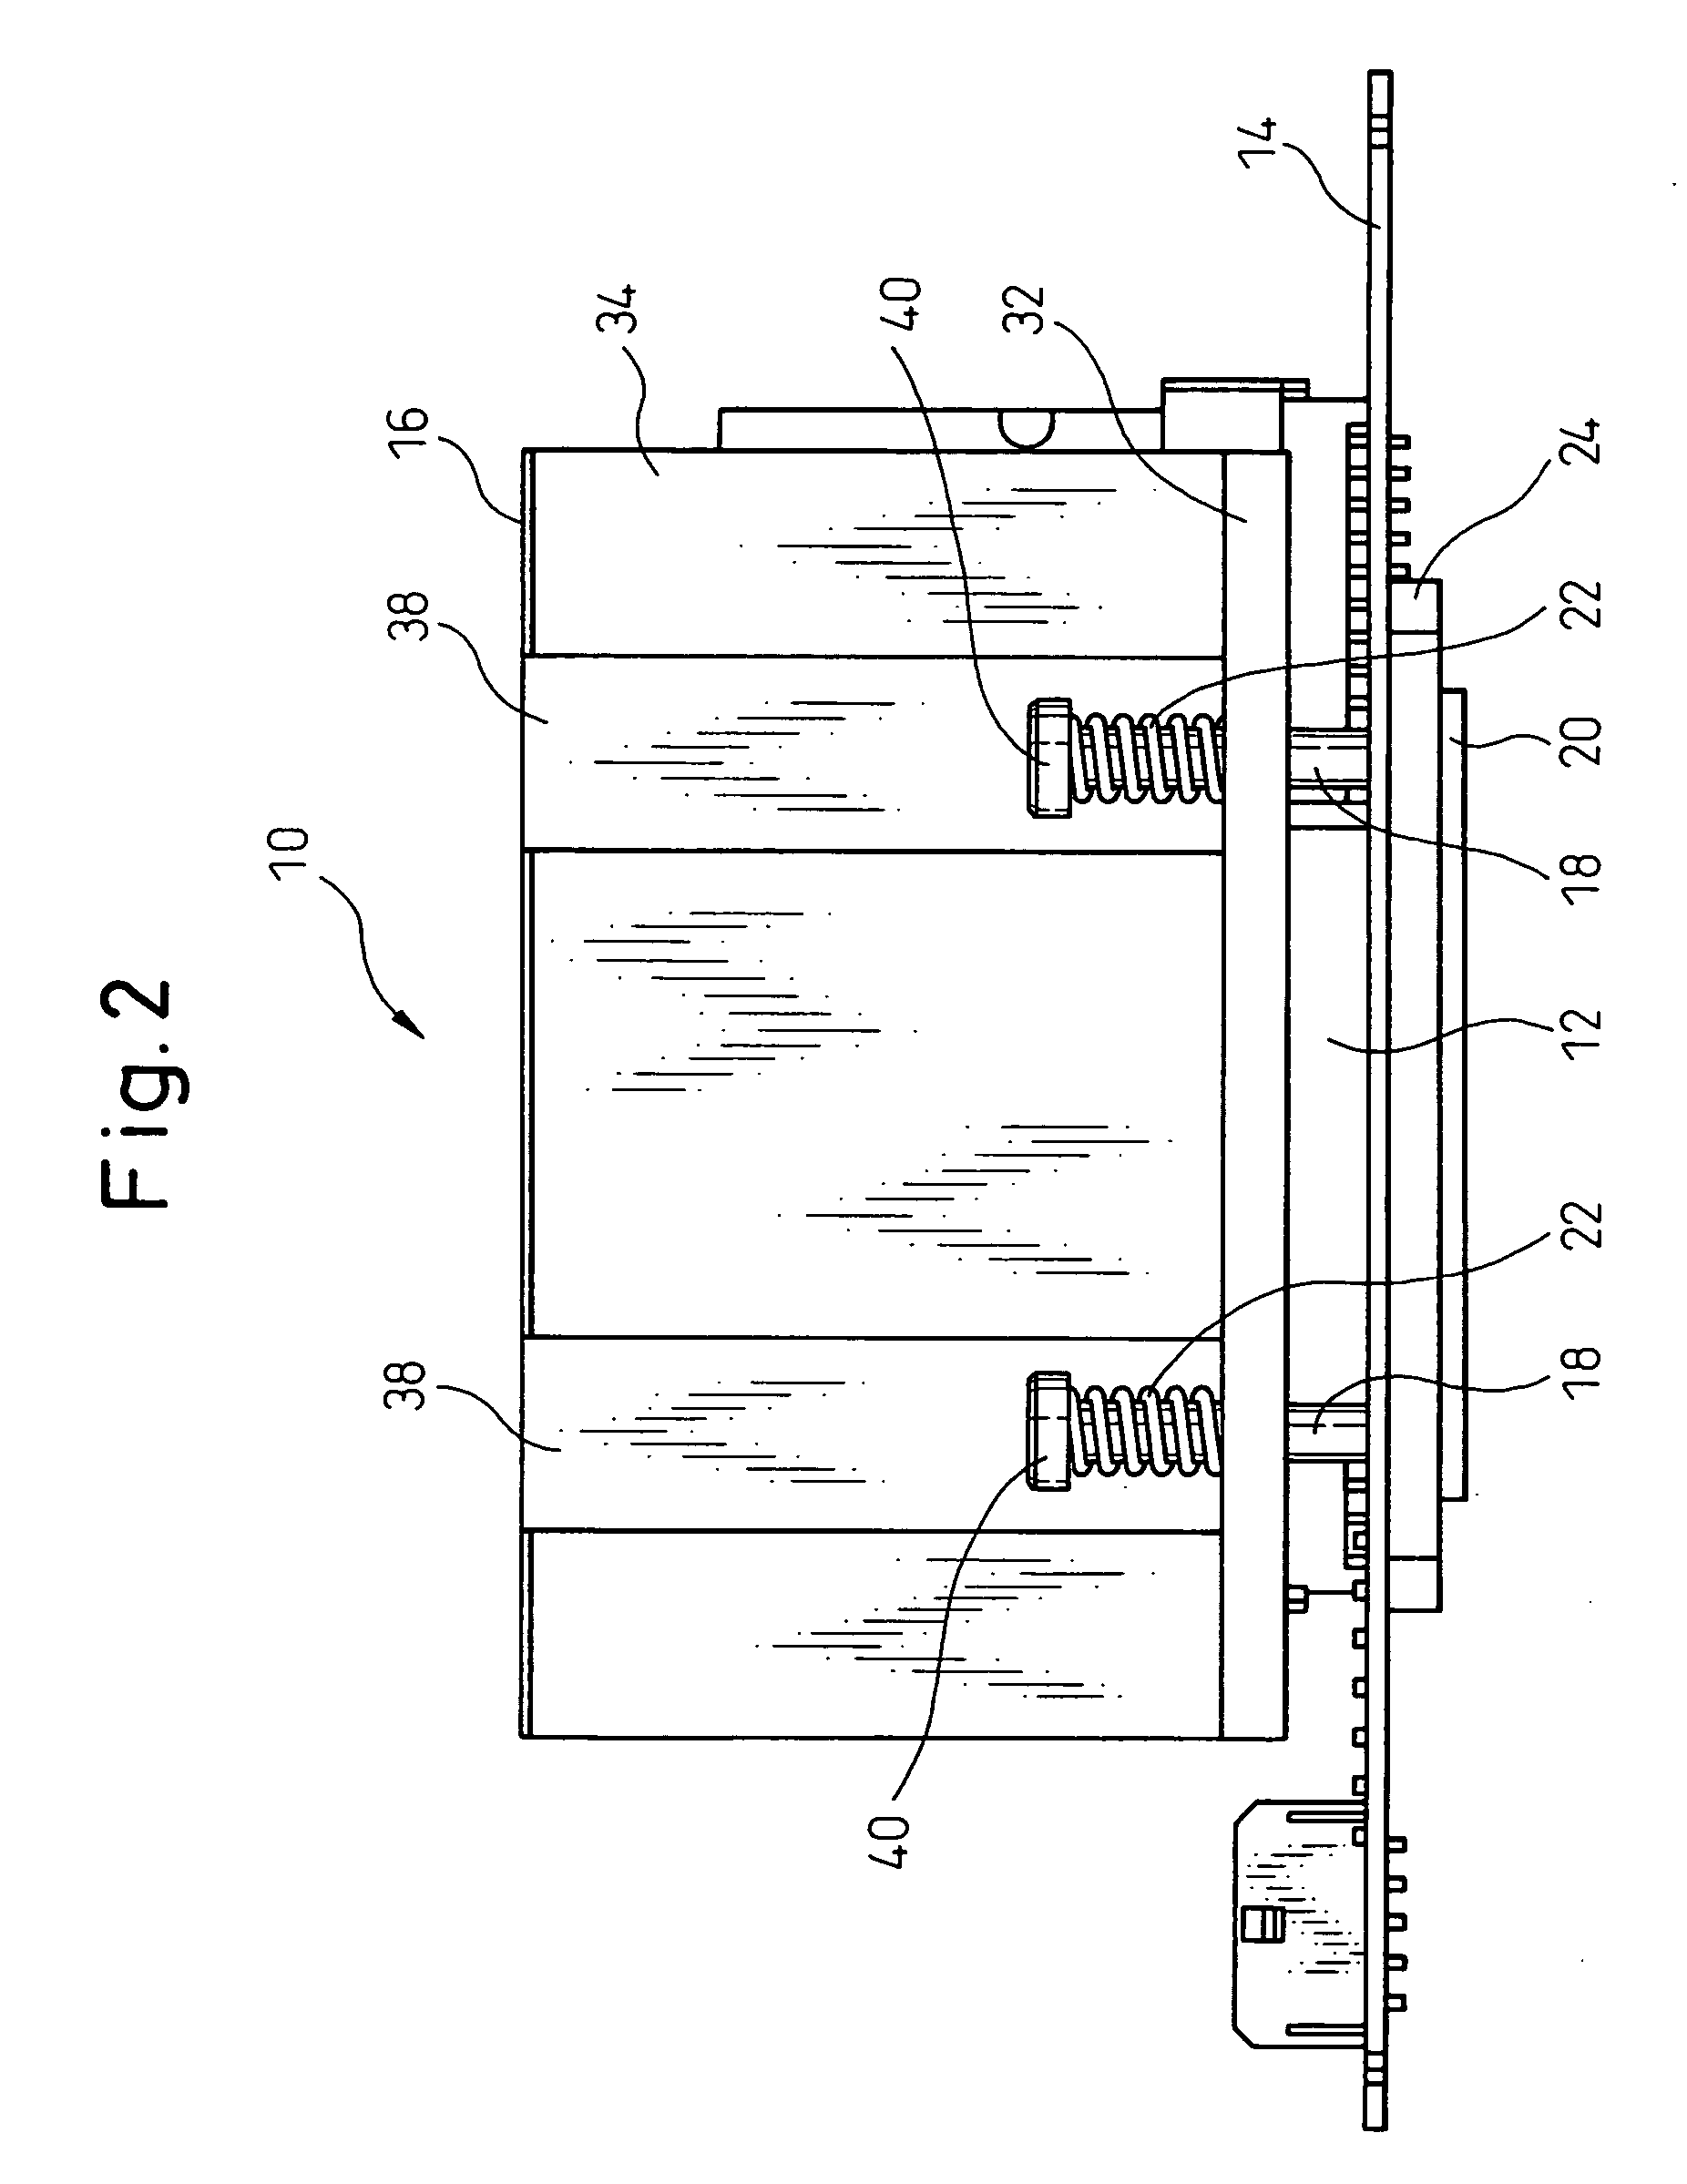 Semiconductor device with pins and method of assembling the semiconductor device